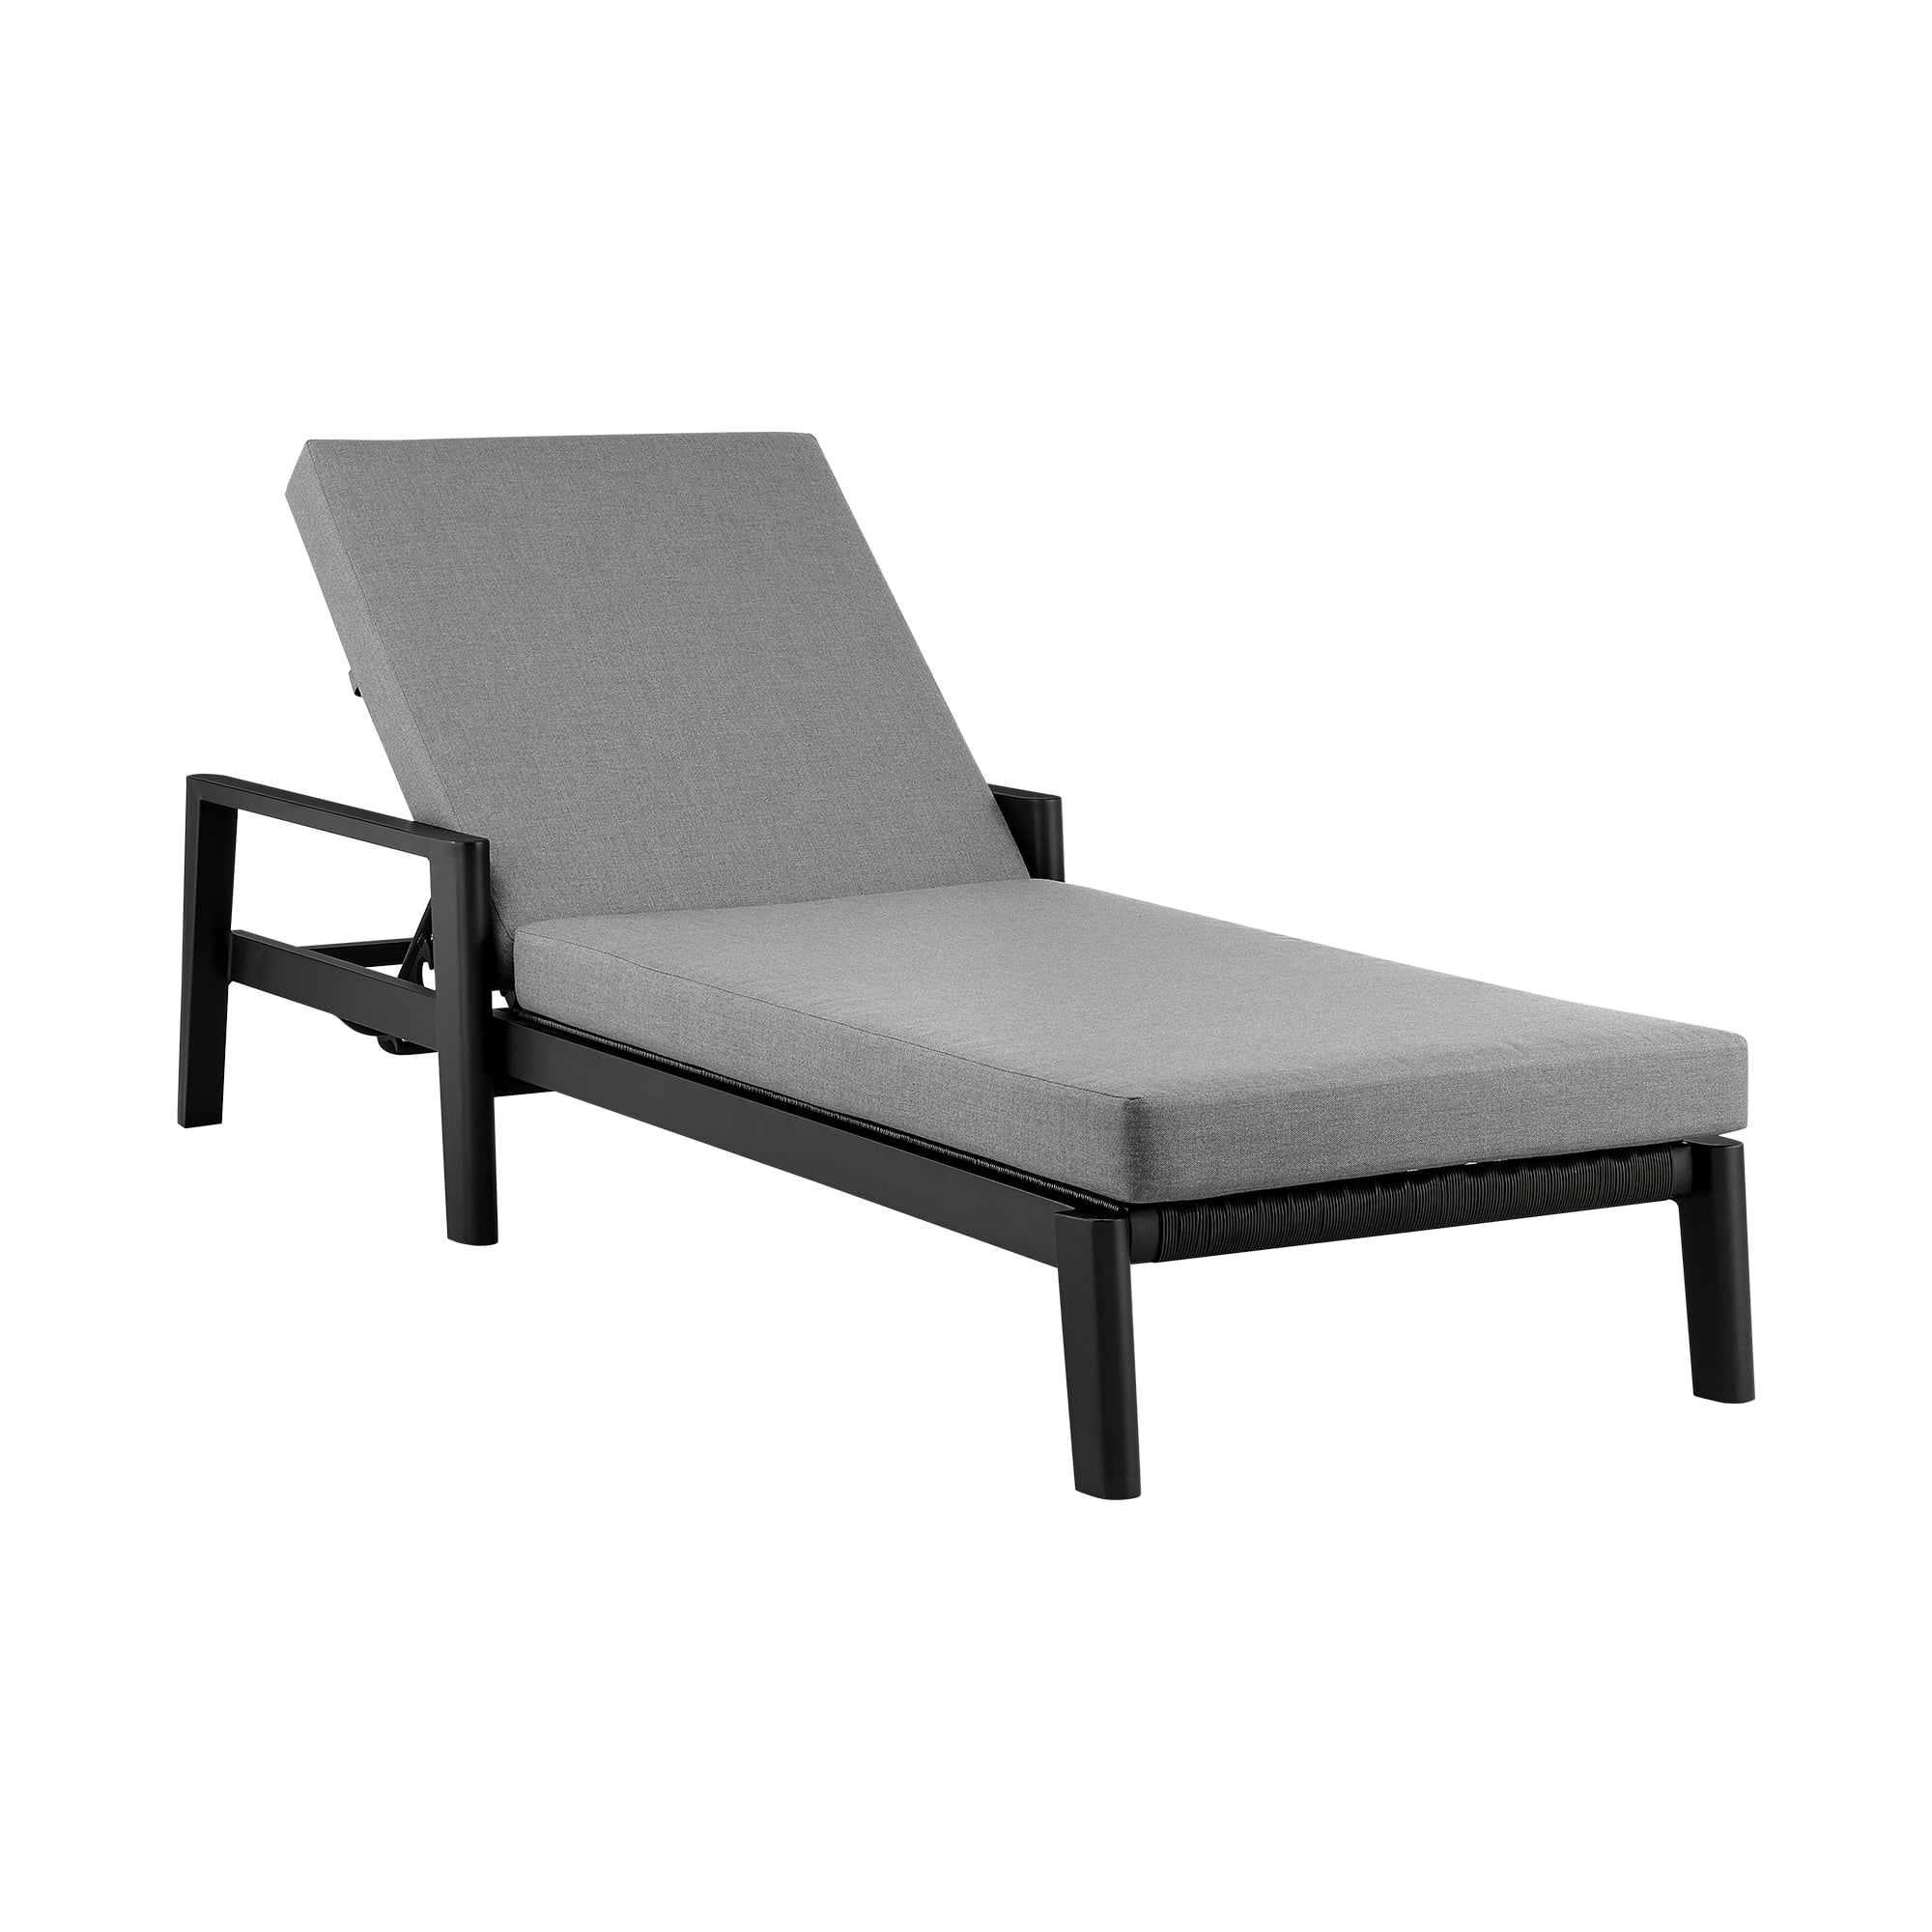 Postcode cel kleermaker Grand Outdoor Patio Adjustable Chaise Lounge Chair in Aluminum with Grey  Cushions - Walmart.com